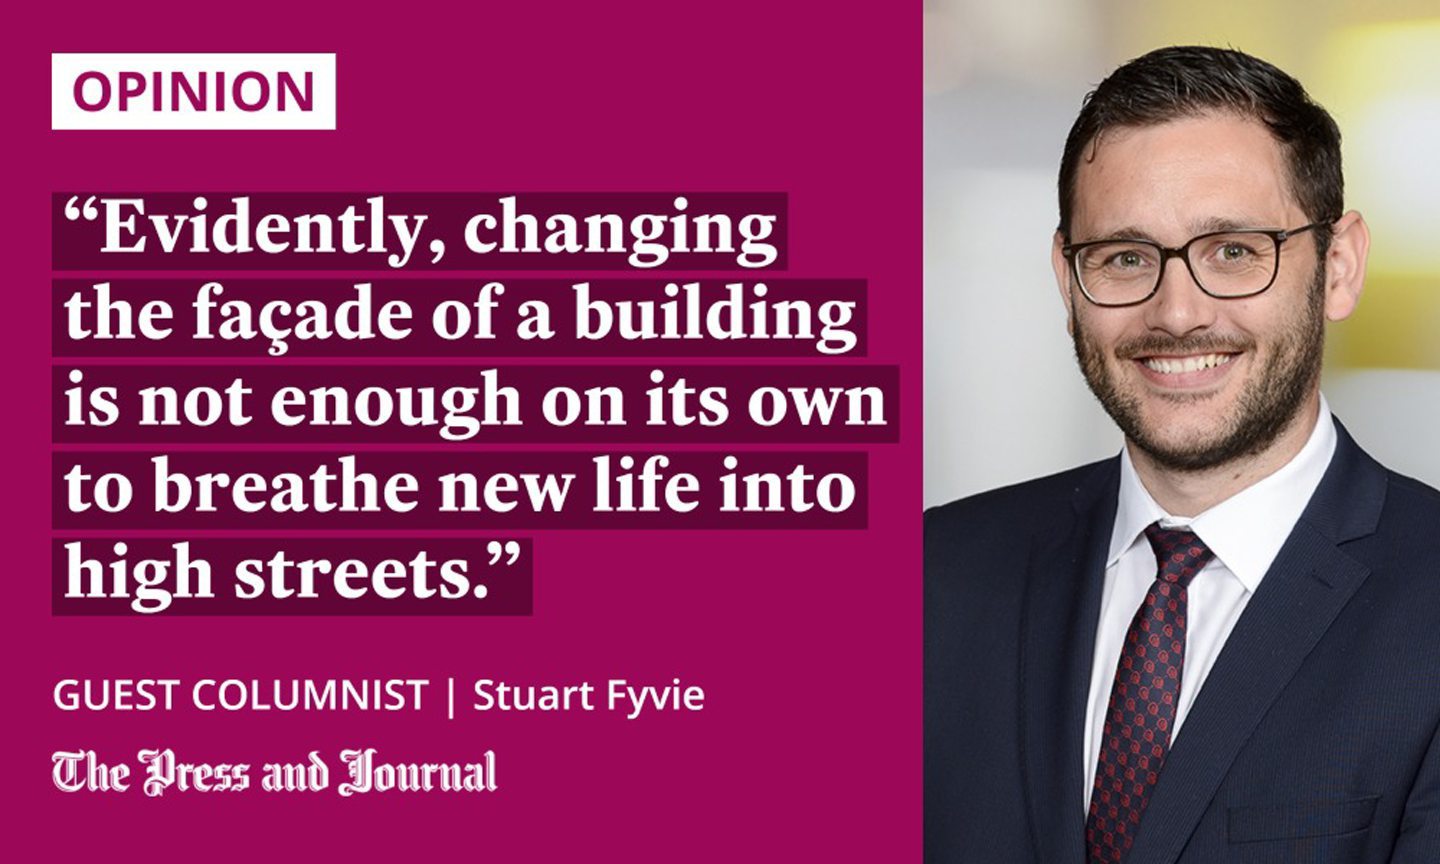 Guest columnist, Stuart Fyvie, speaks about Aberdeen city centre: "Evidently, changing the façade of a building is not enough on its own to breathe new life into high streets."